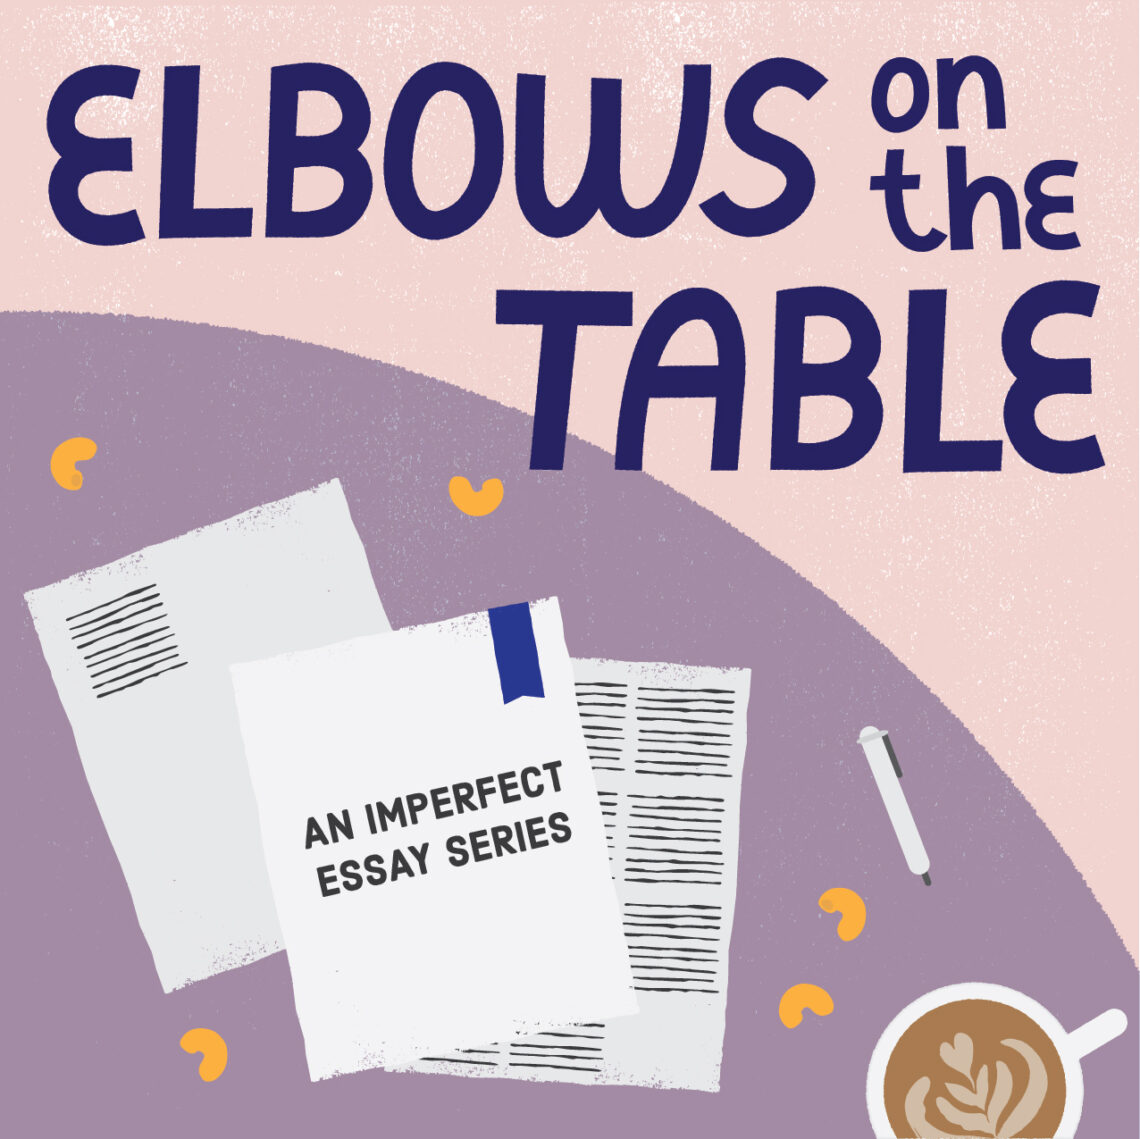 Elbows on the Table, an essay series